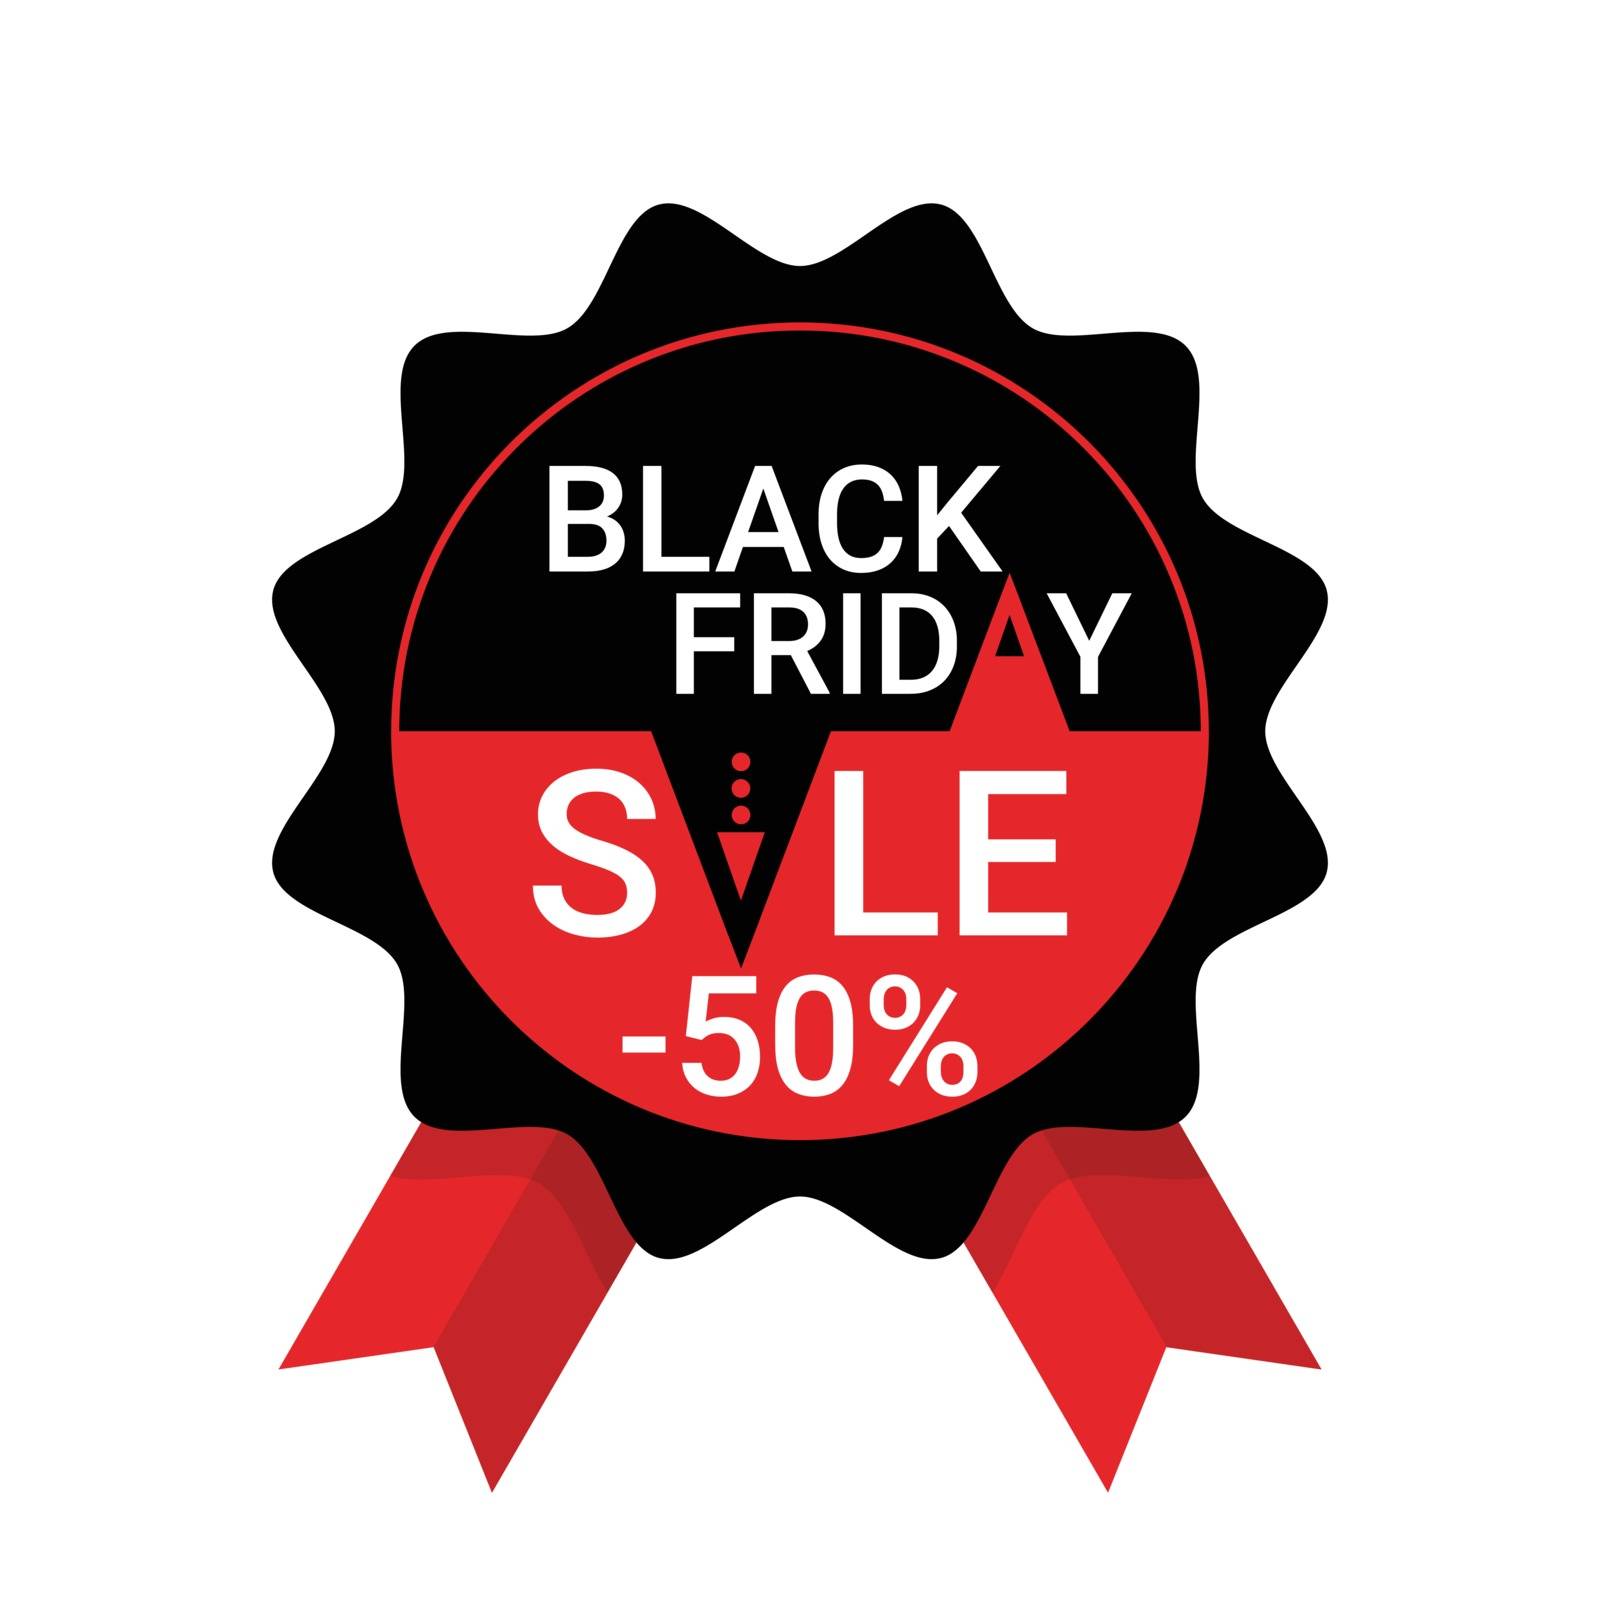 Black friday sale symbol or Black friday discount banner. Special offer sale tag discount, retail price sticker promotions sign. Design for logo, emblem, brochure, card, ad or badge. Isolated vector illustration by foxeel